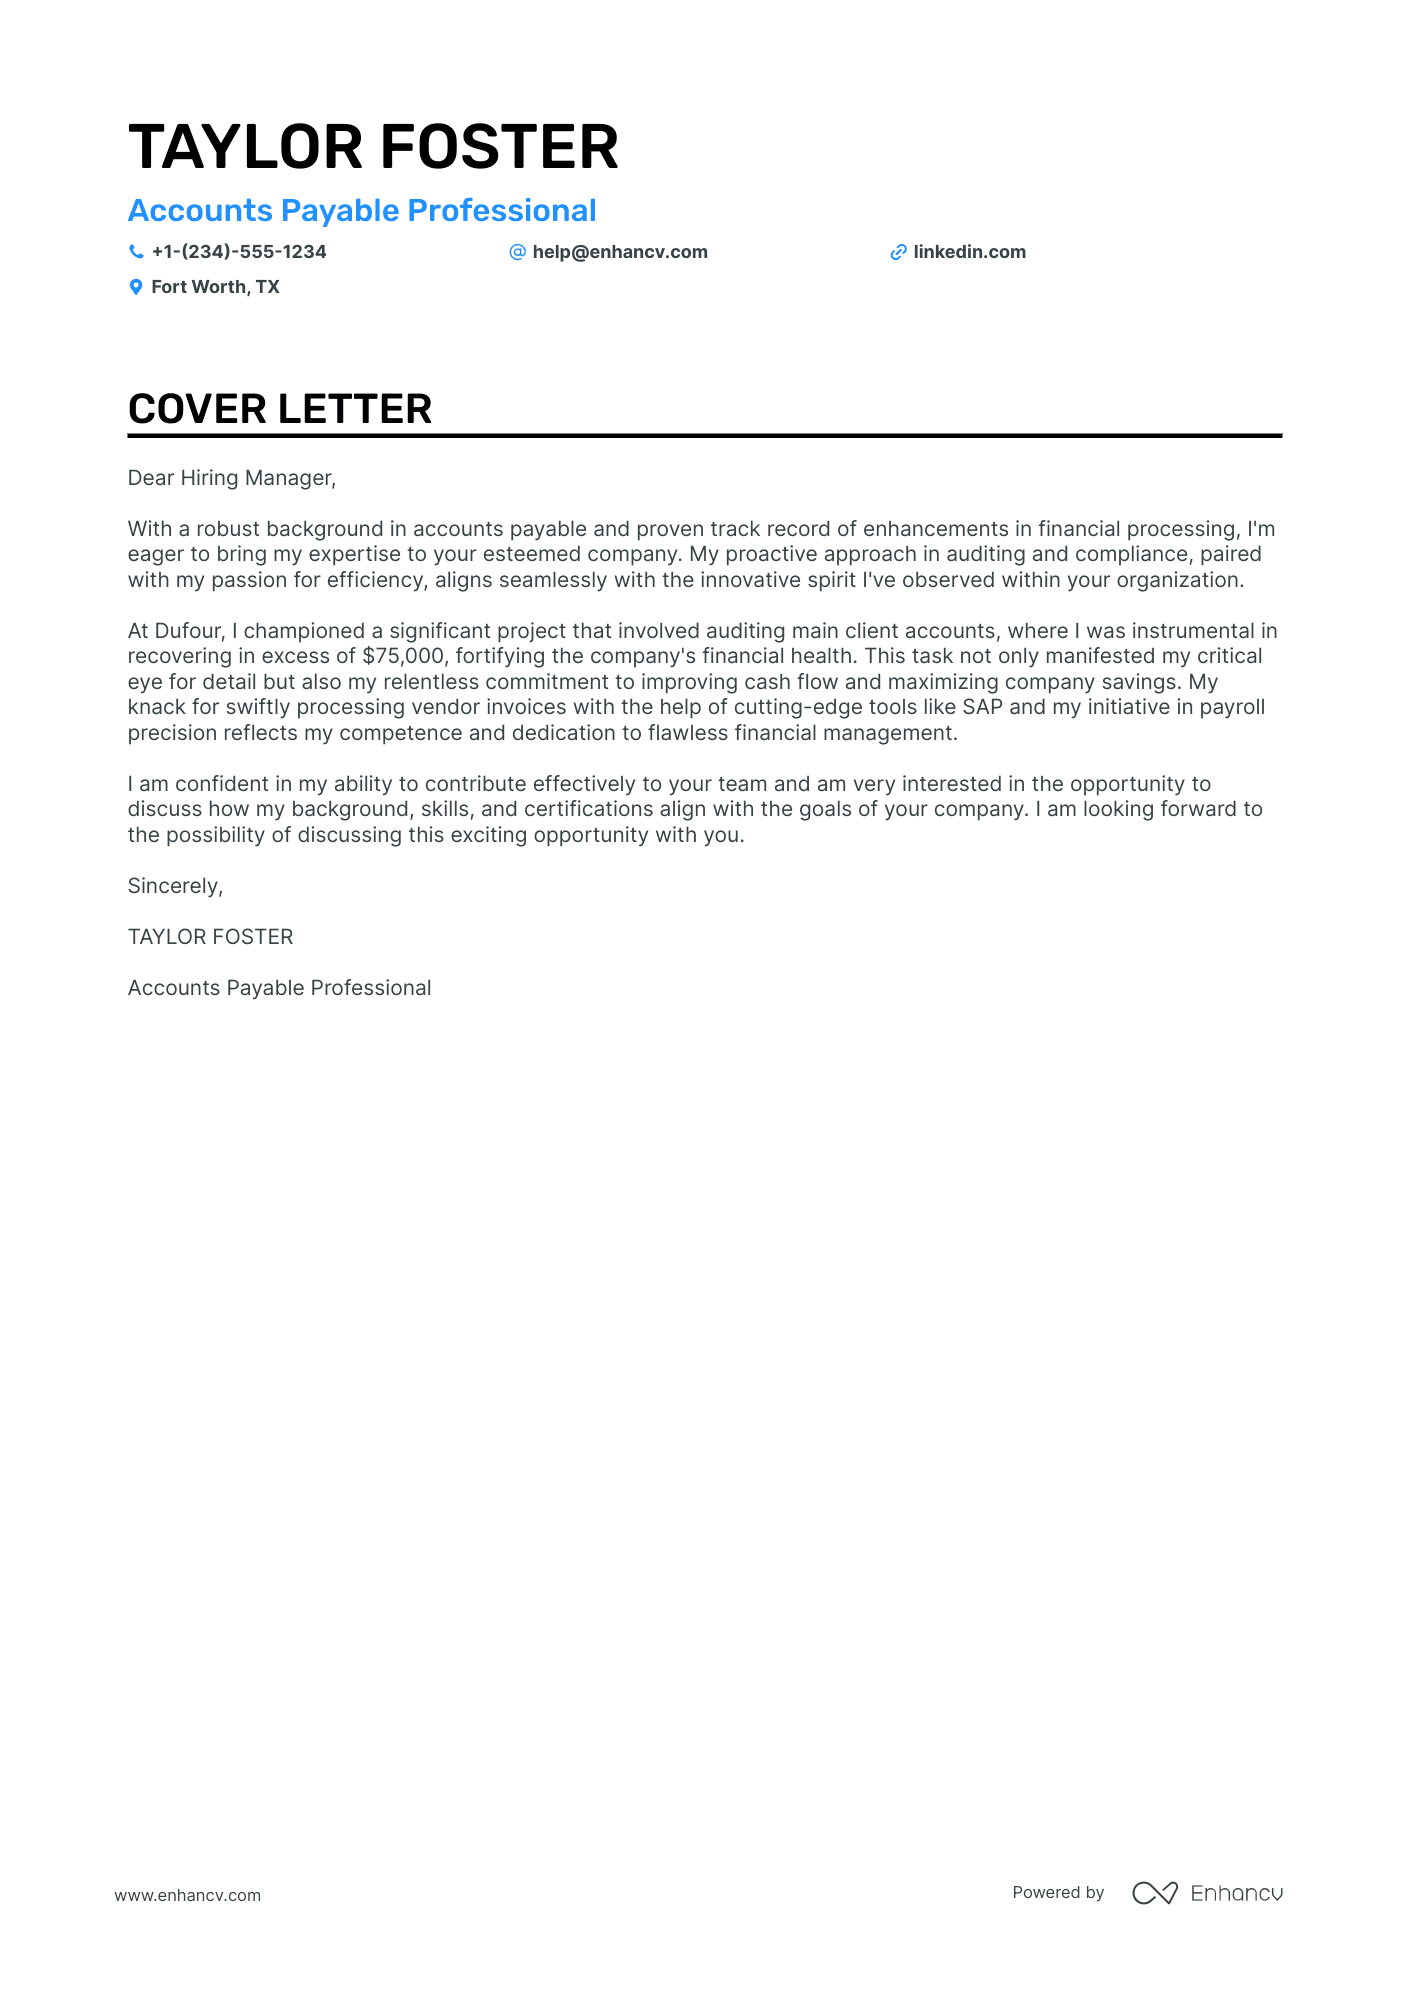 Accounts Payable cover letter